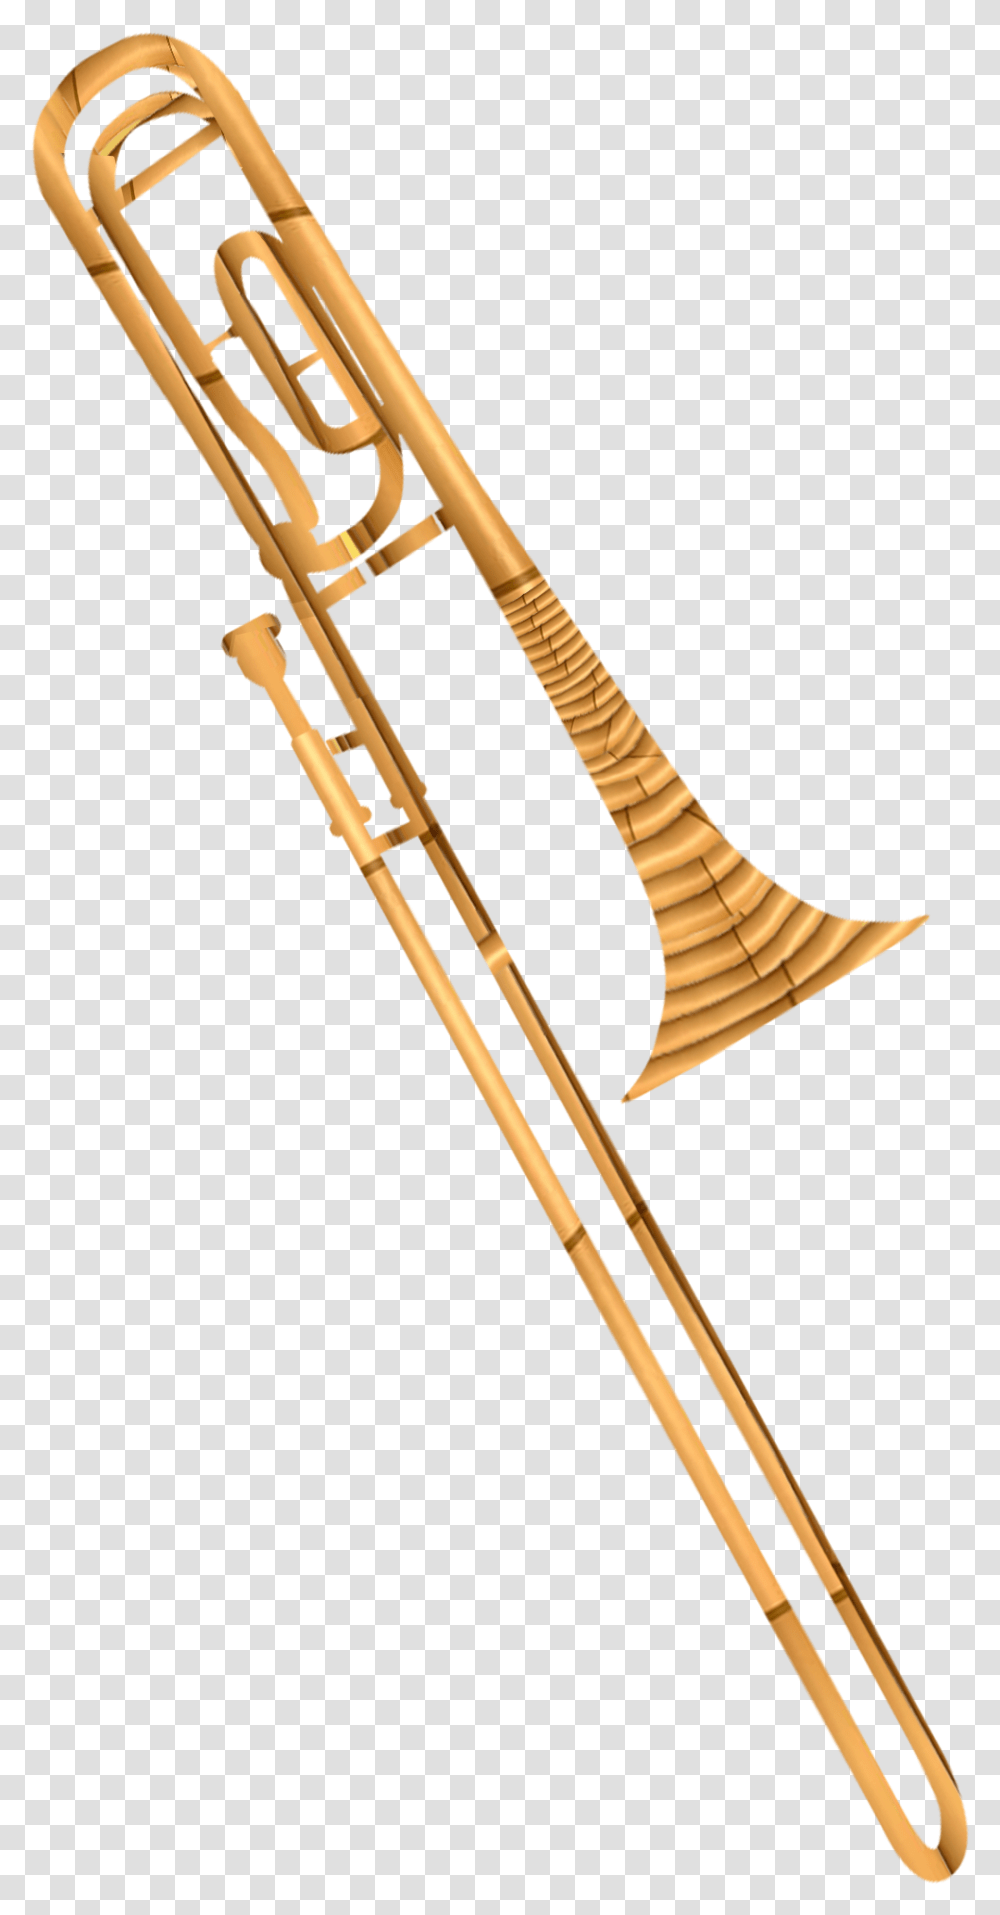 A Brass Instrument Consisting Of A Long Cylindrical Types Of Trombone, Musical Instrument, Brass Section, Horn, Sword Transparent Png